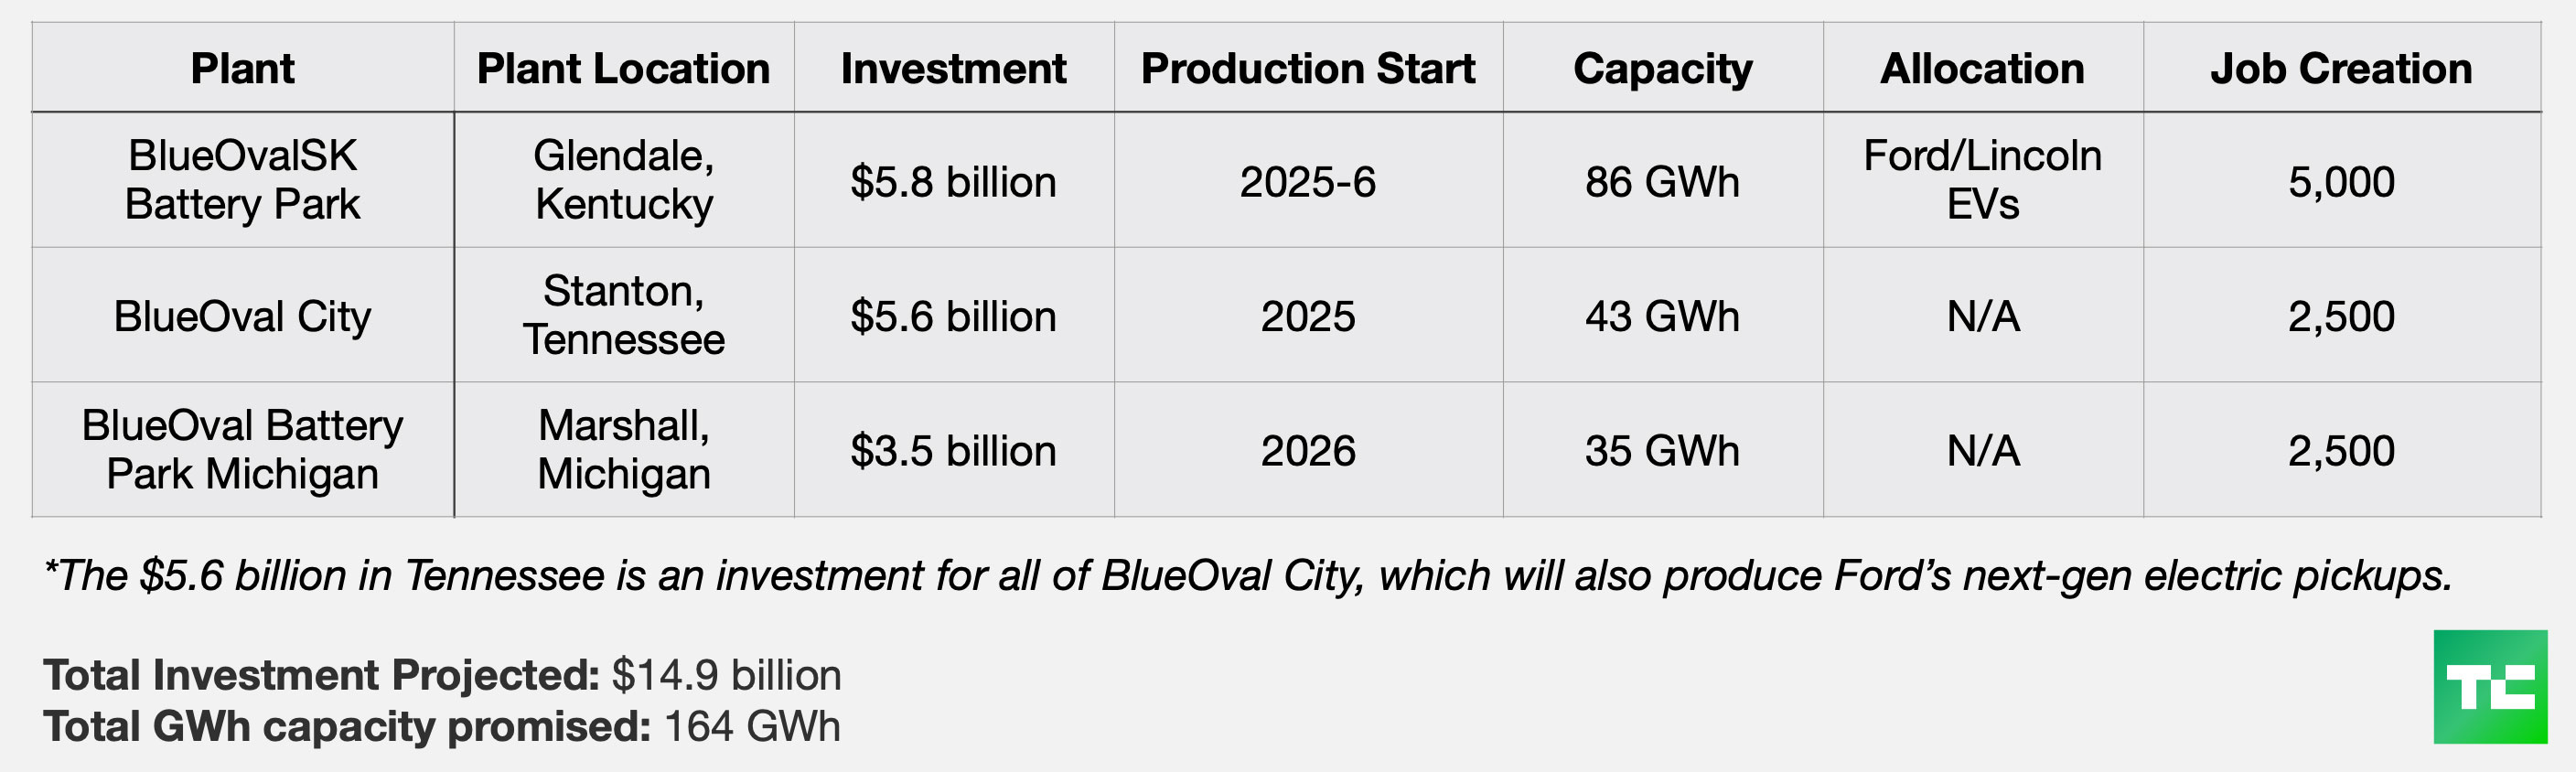 Ford's 2023 battery plant plans broken down by Plant name, Plant location, Investment in each plant, production start, capacity, allocation and job creation. Total investment projected is $14.9 billion. Total GWh capacity promised is 164 GWh. 